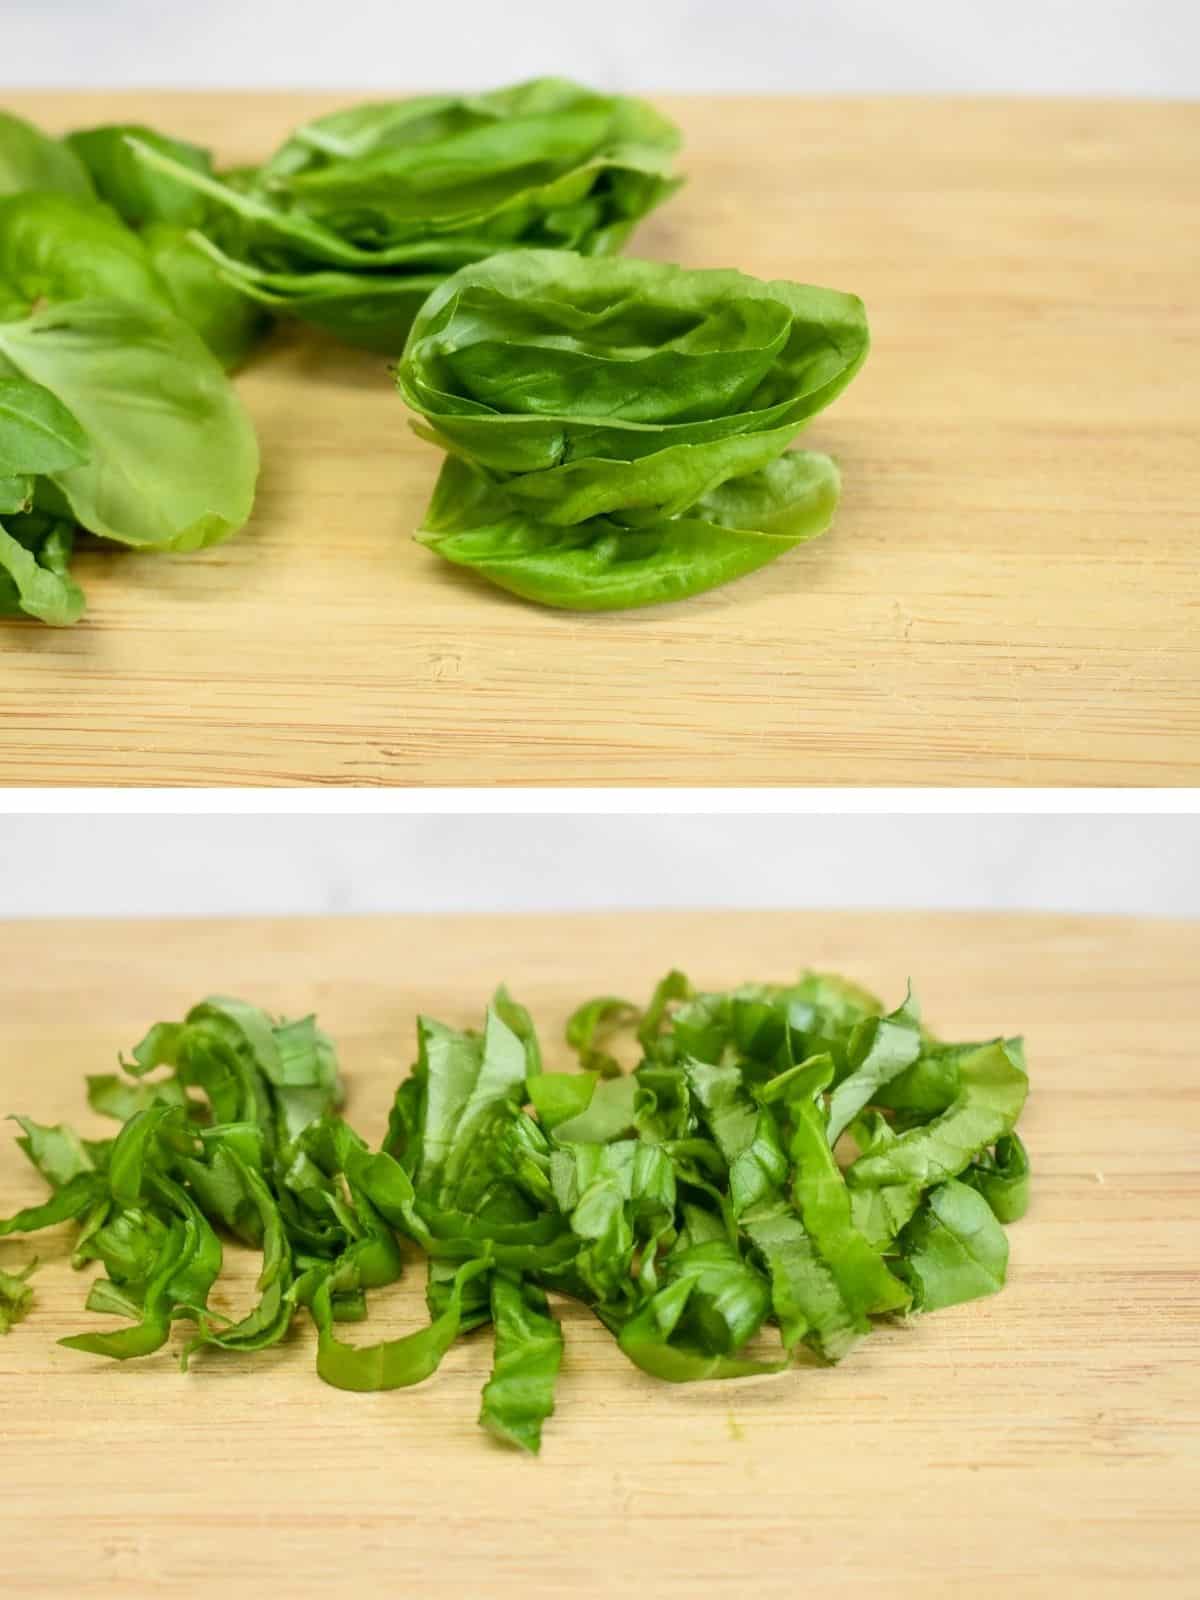 Two images, the top one of stacked basil leaves and the second one of basil ribbons after it has been cut.